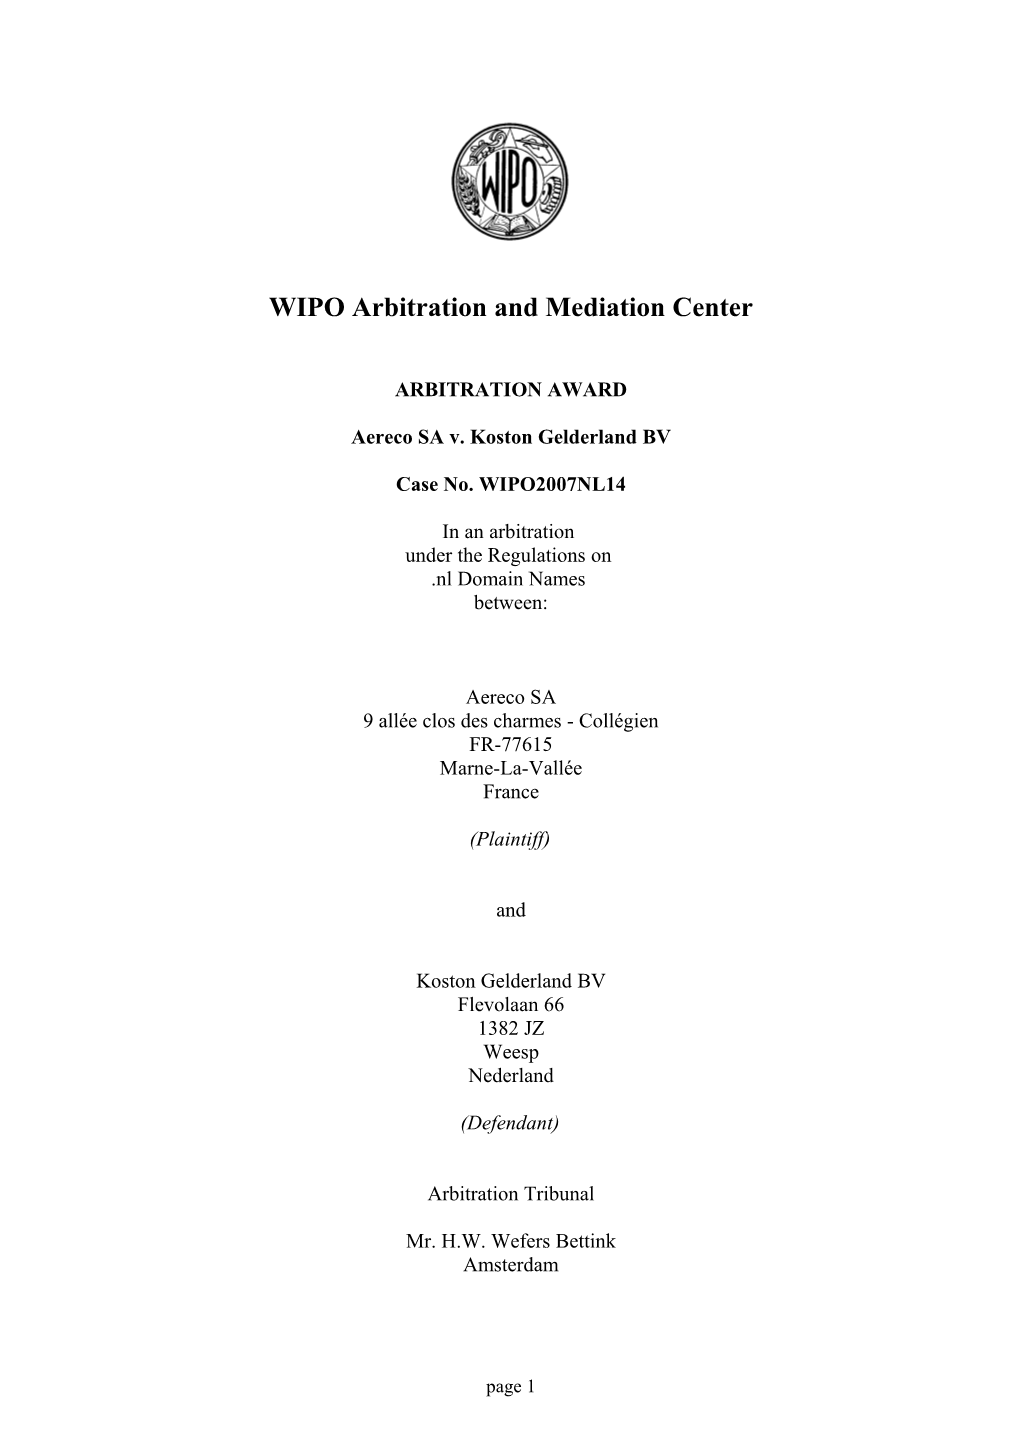 WIPO Arbitration and Mediationcenter